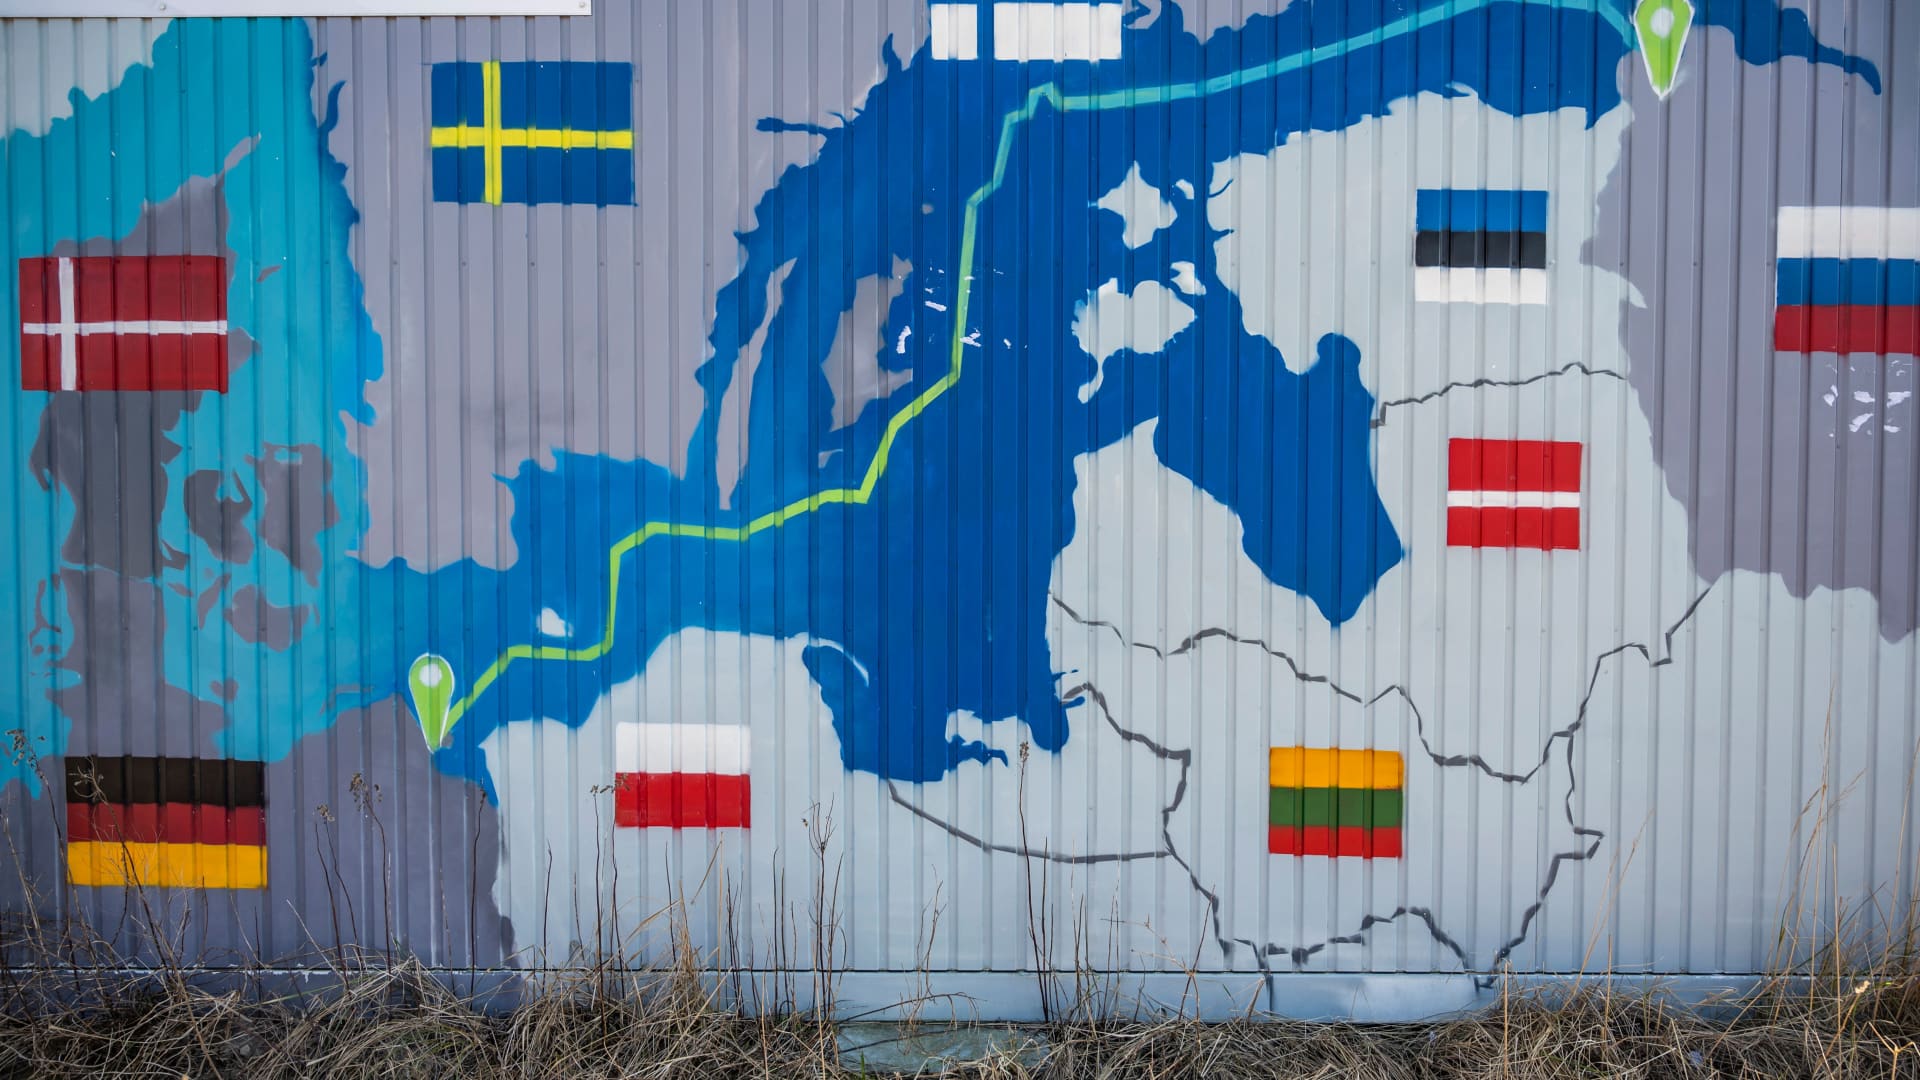 A container is decorated with a map showing the Nord Stream 2 gas pipeline, which was expected to deliver Russian gas to European households, in Lubmin's industrial park, northeastern Germany, on March 1, 2022.